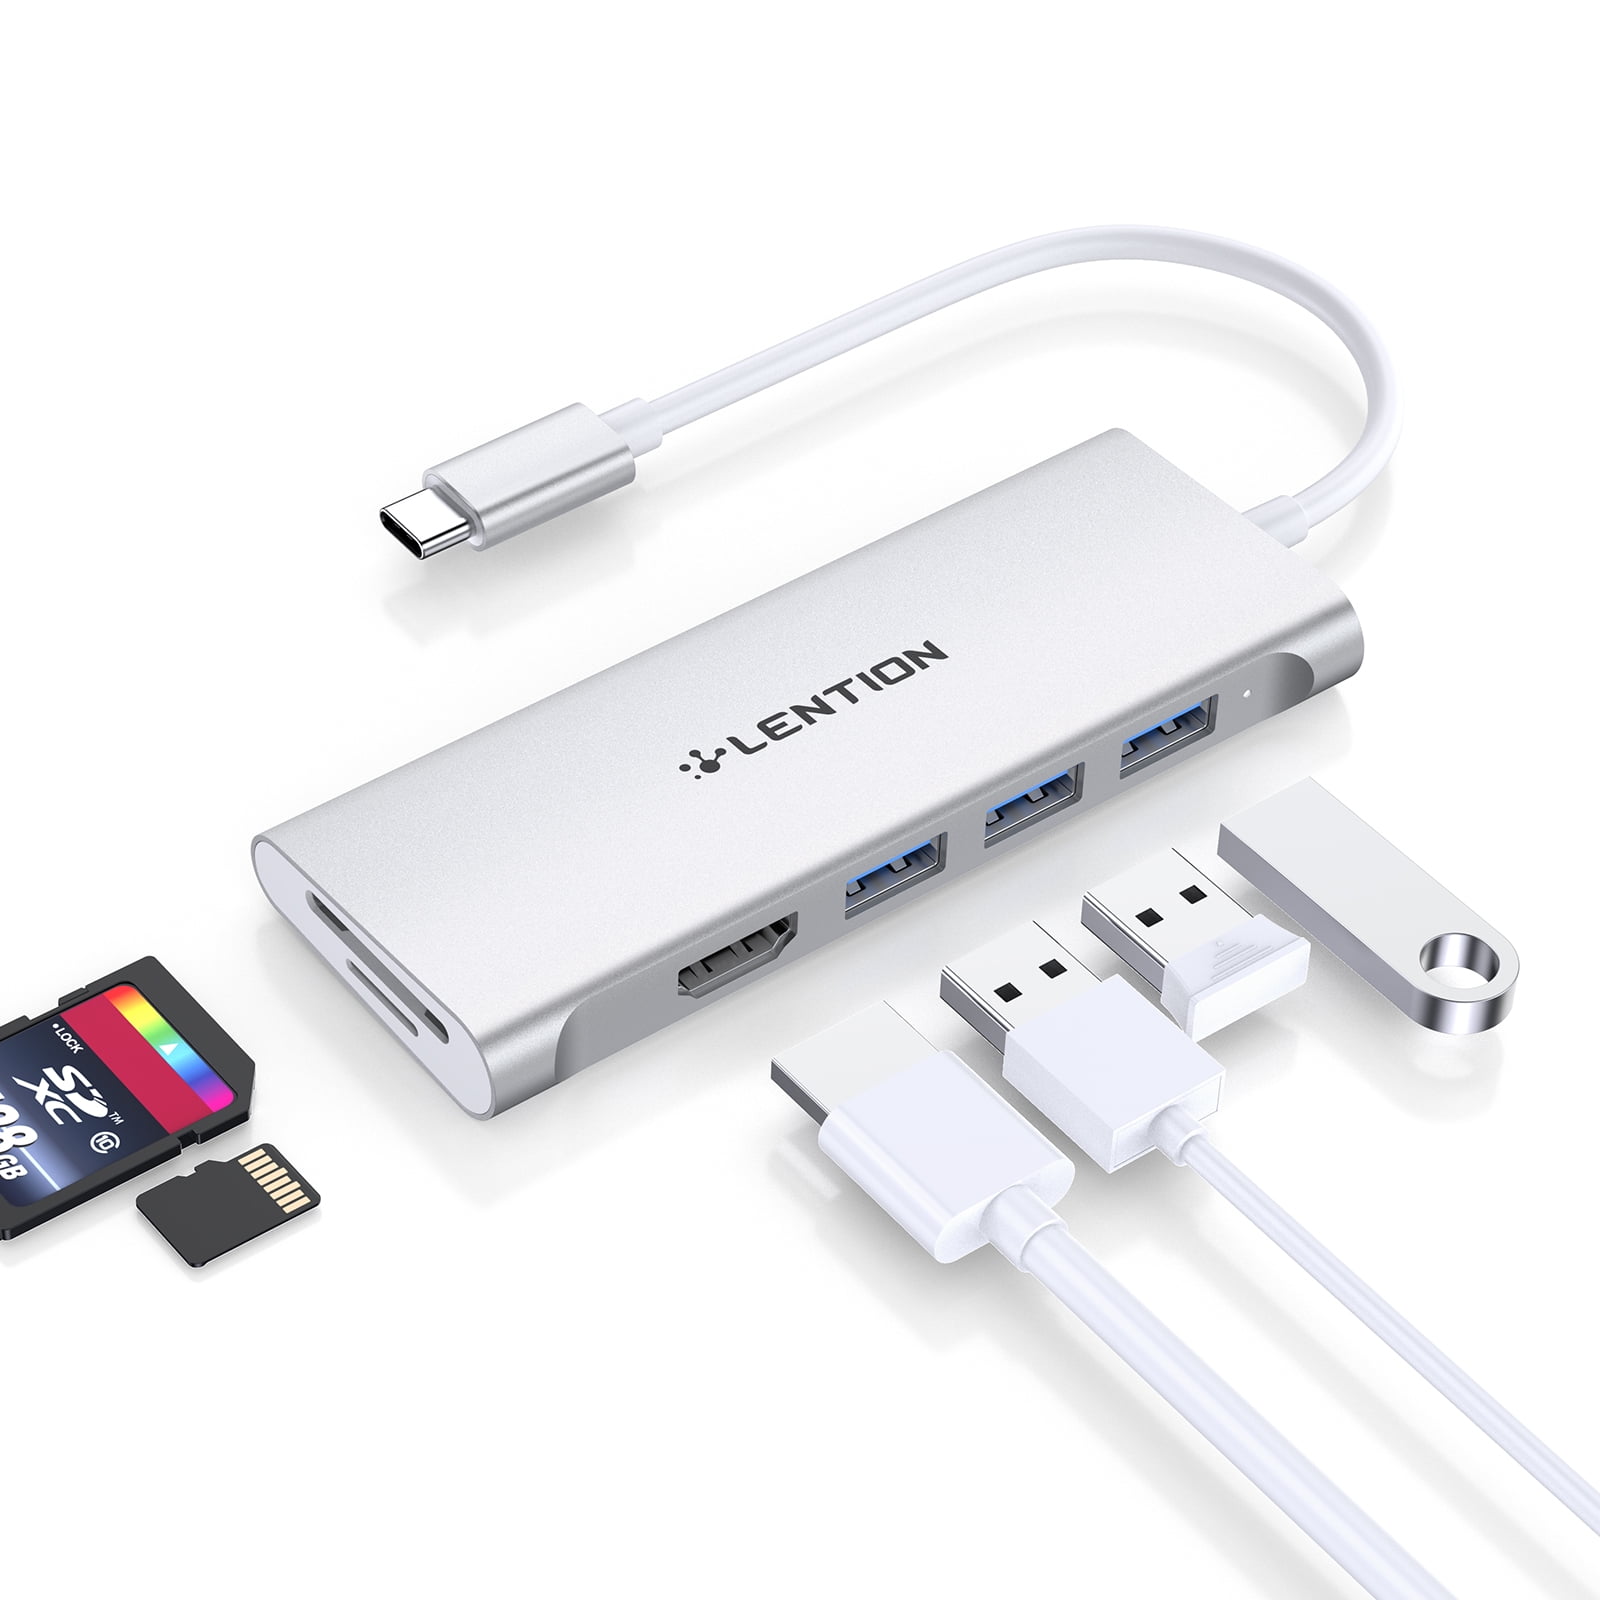 The Smallest USB C Hub with HDMI and USB 3.0 USB C HDMI 4k Multiport Adapter ChromeBook MacBook Air 2018 Surface Go and More USB-C Devices. Compatible MacBook Pro 2018/2017 